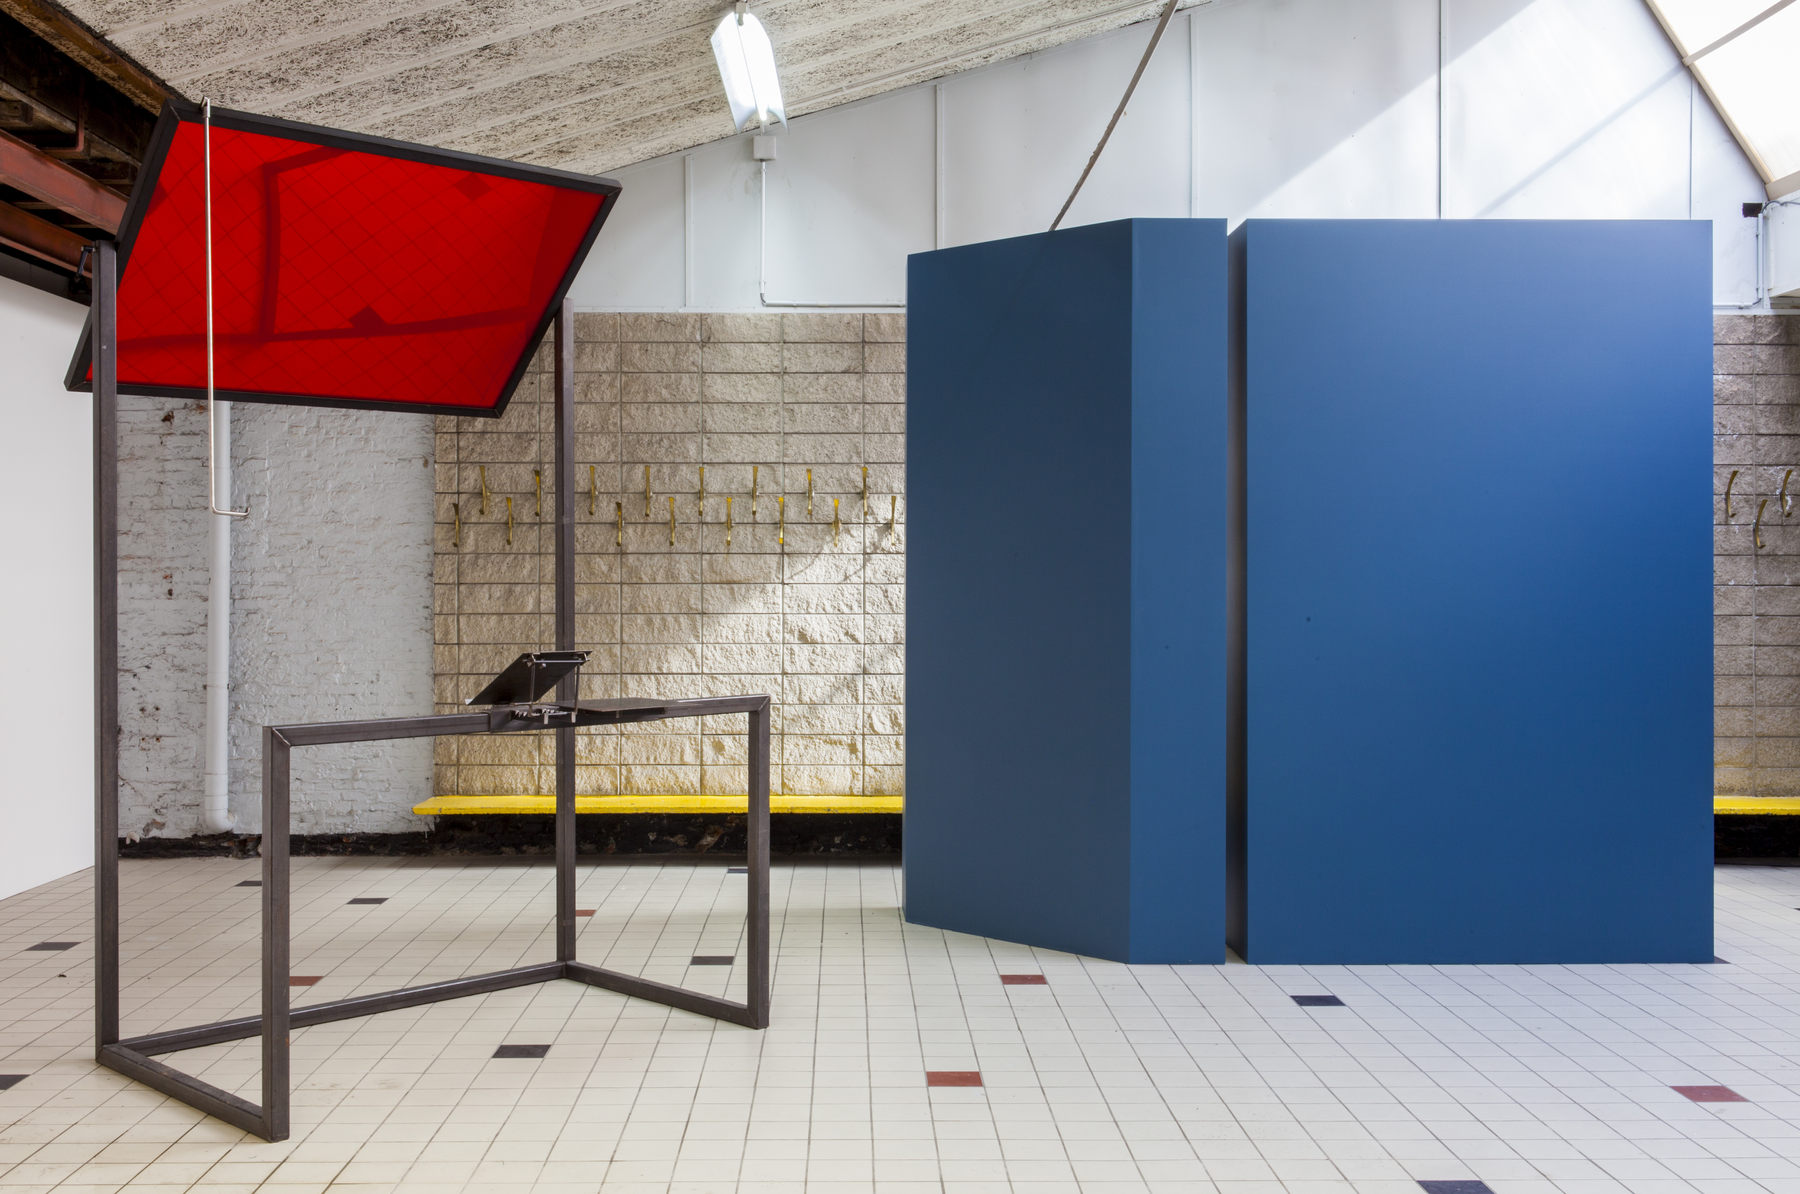 Céline Condorelli, 'Additionals (Structure for Public Speaking), 2012-2013, in 'The Corner Show’, installation view, Extra City Kunsthal, 2015 © We Document Art